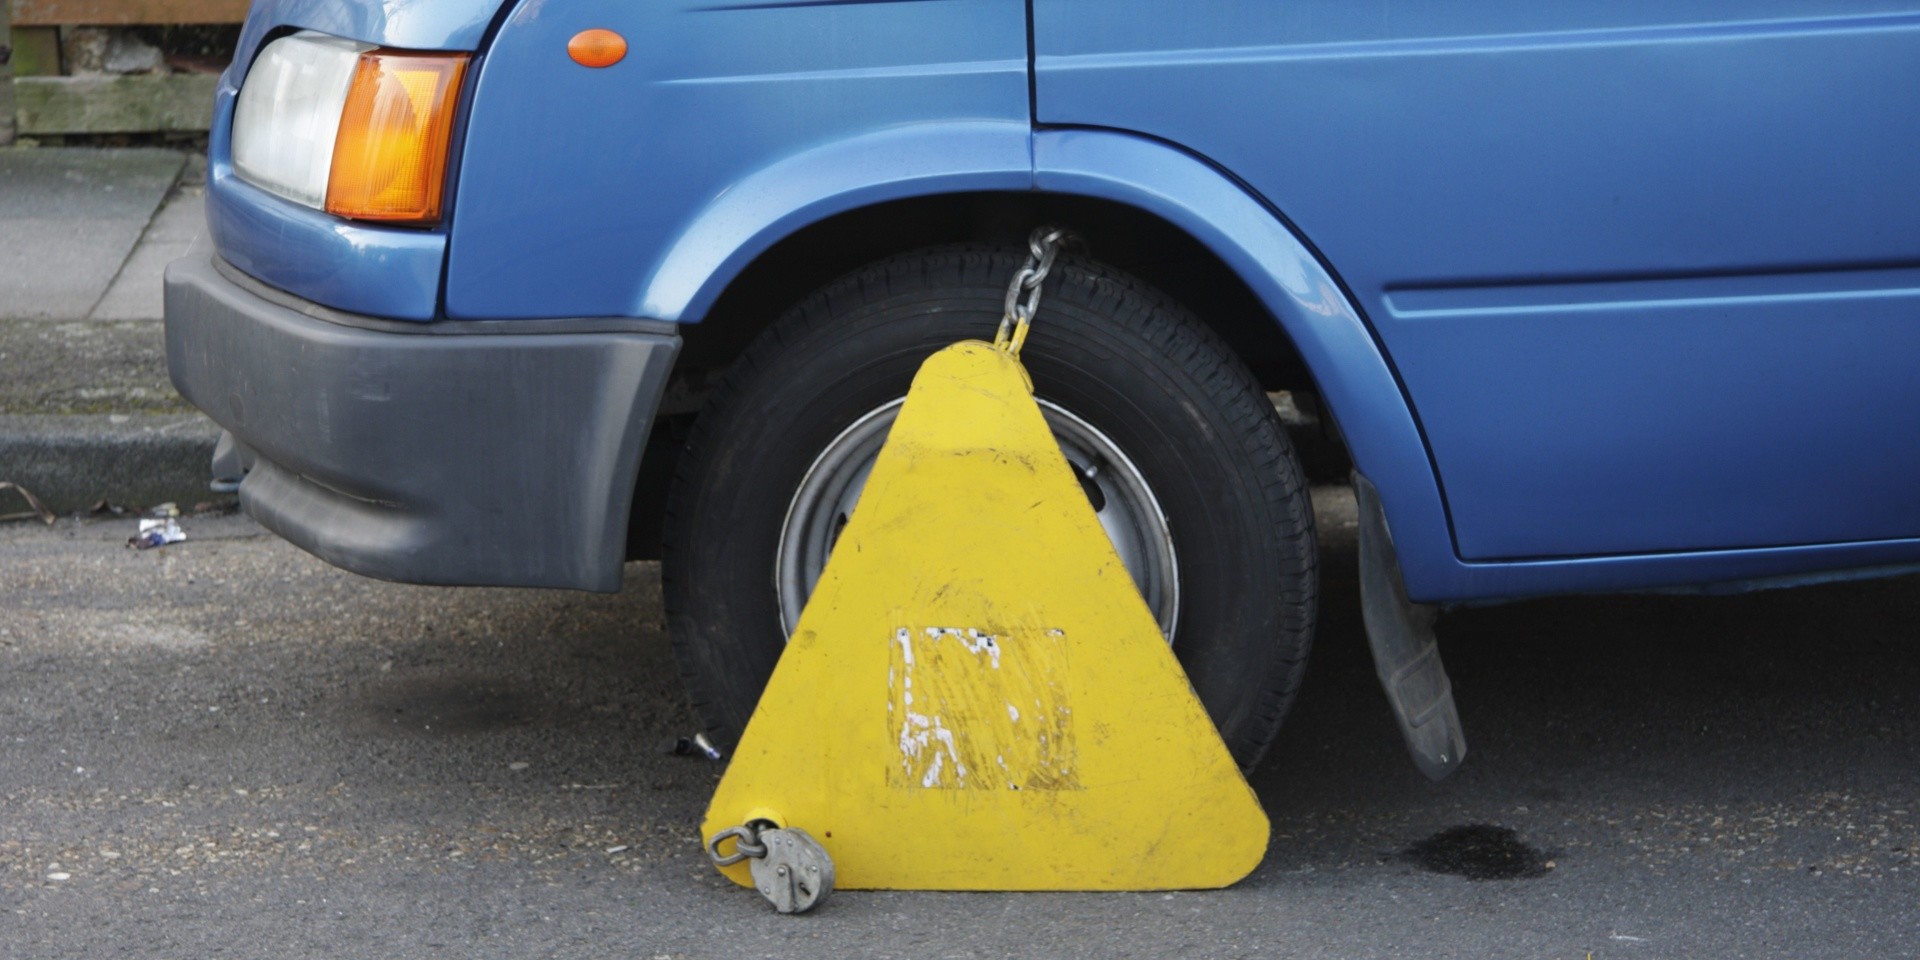 van wheel clamped for not paying tax